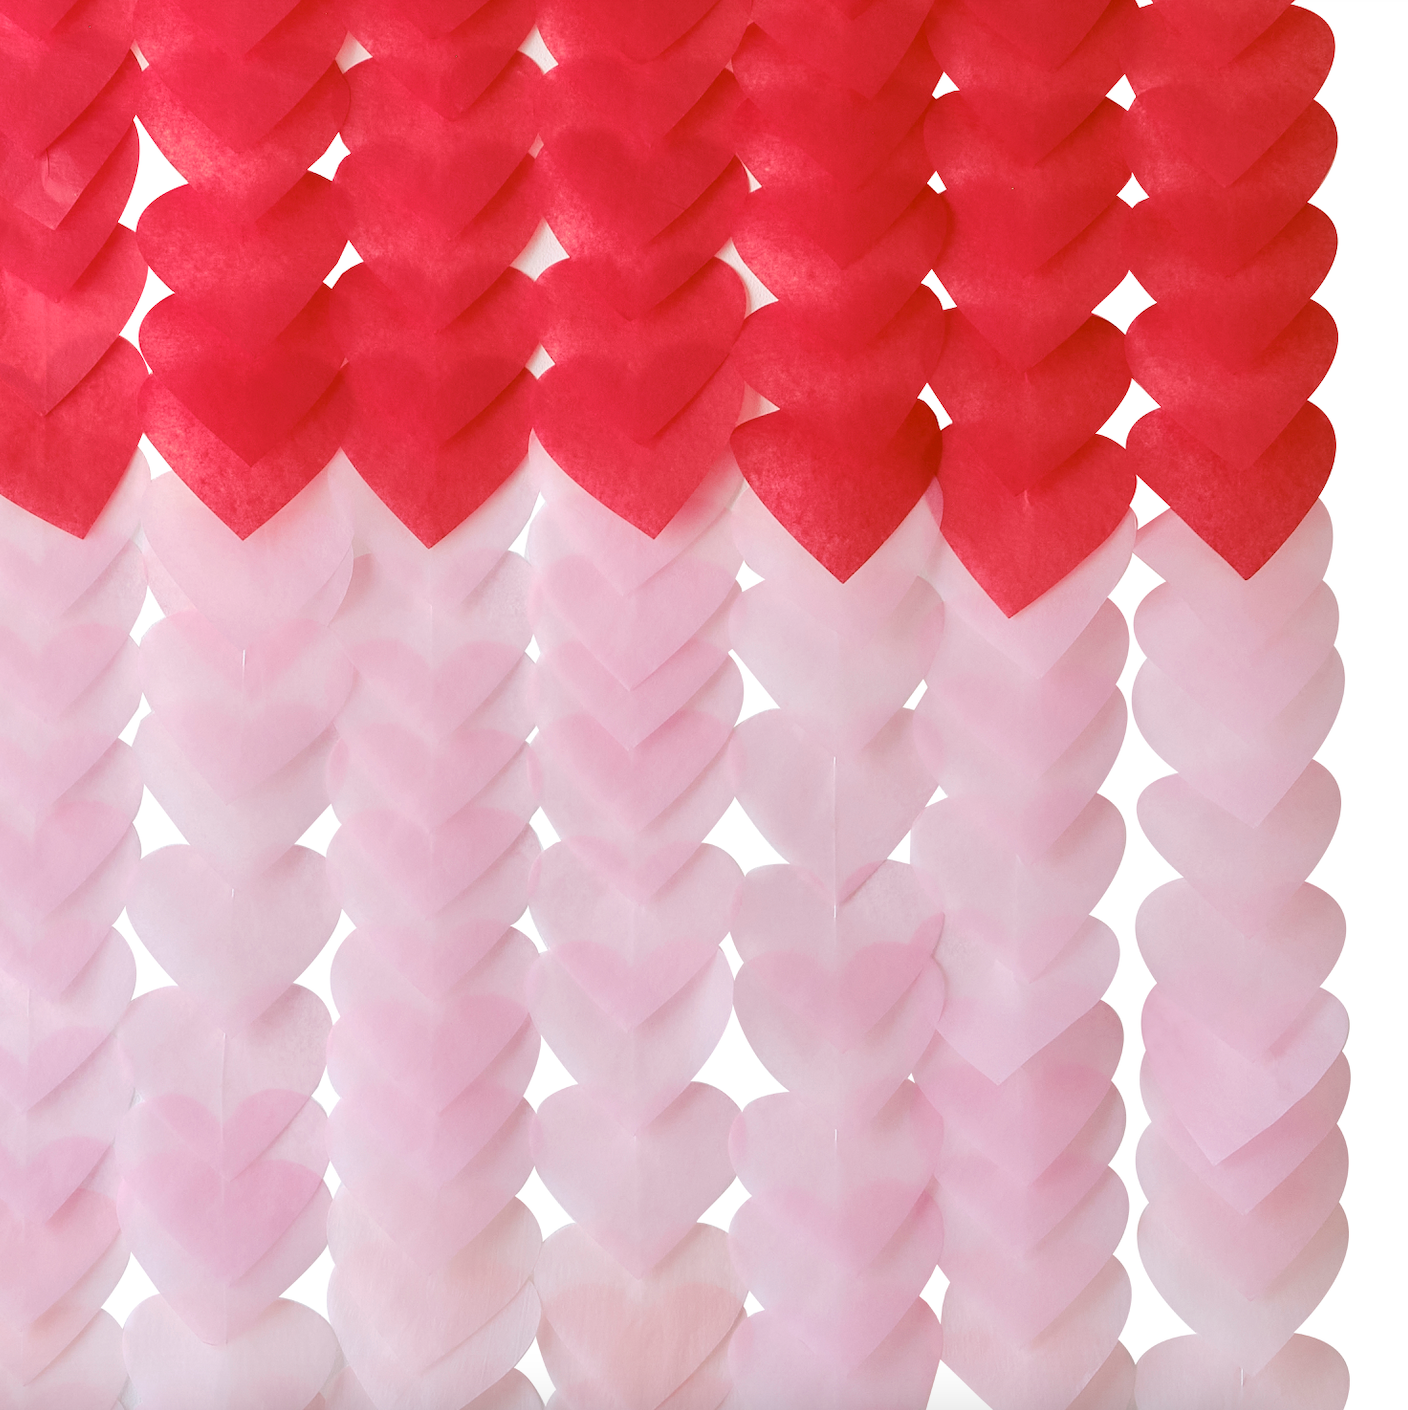 Ombre Heart Party Backdrop